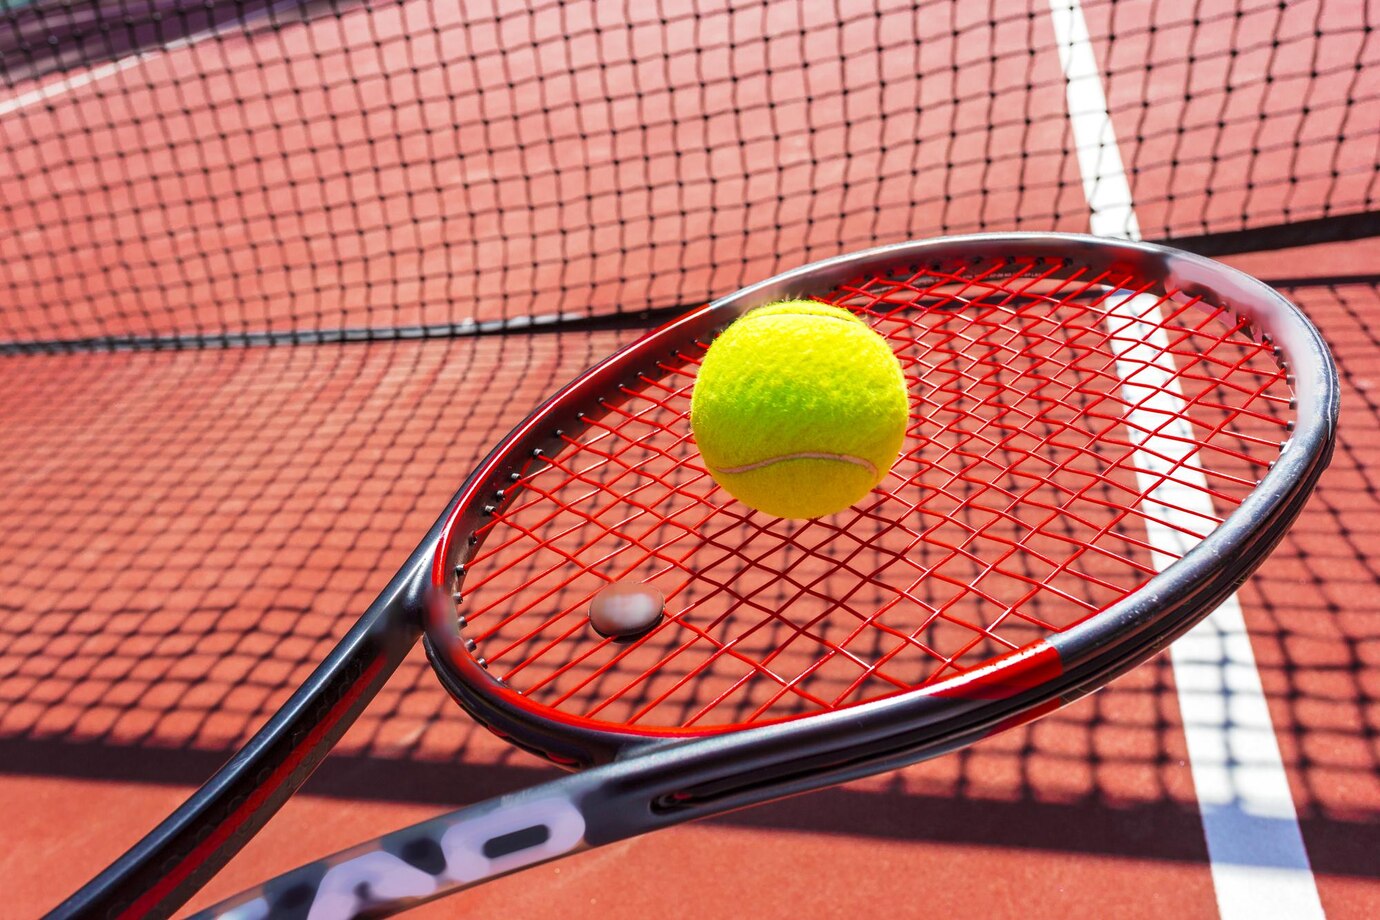 Tennis betting selection of tournaments and tennis players